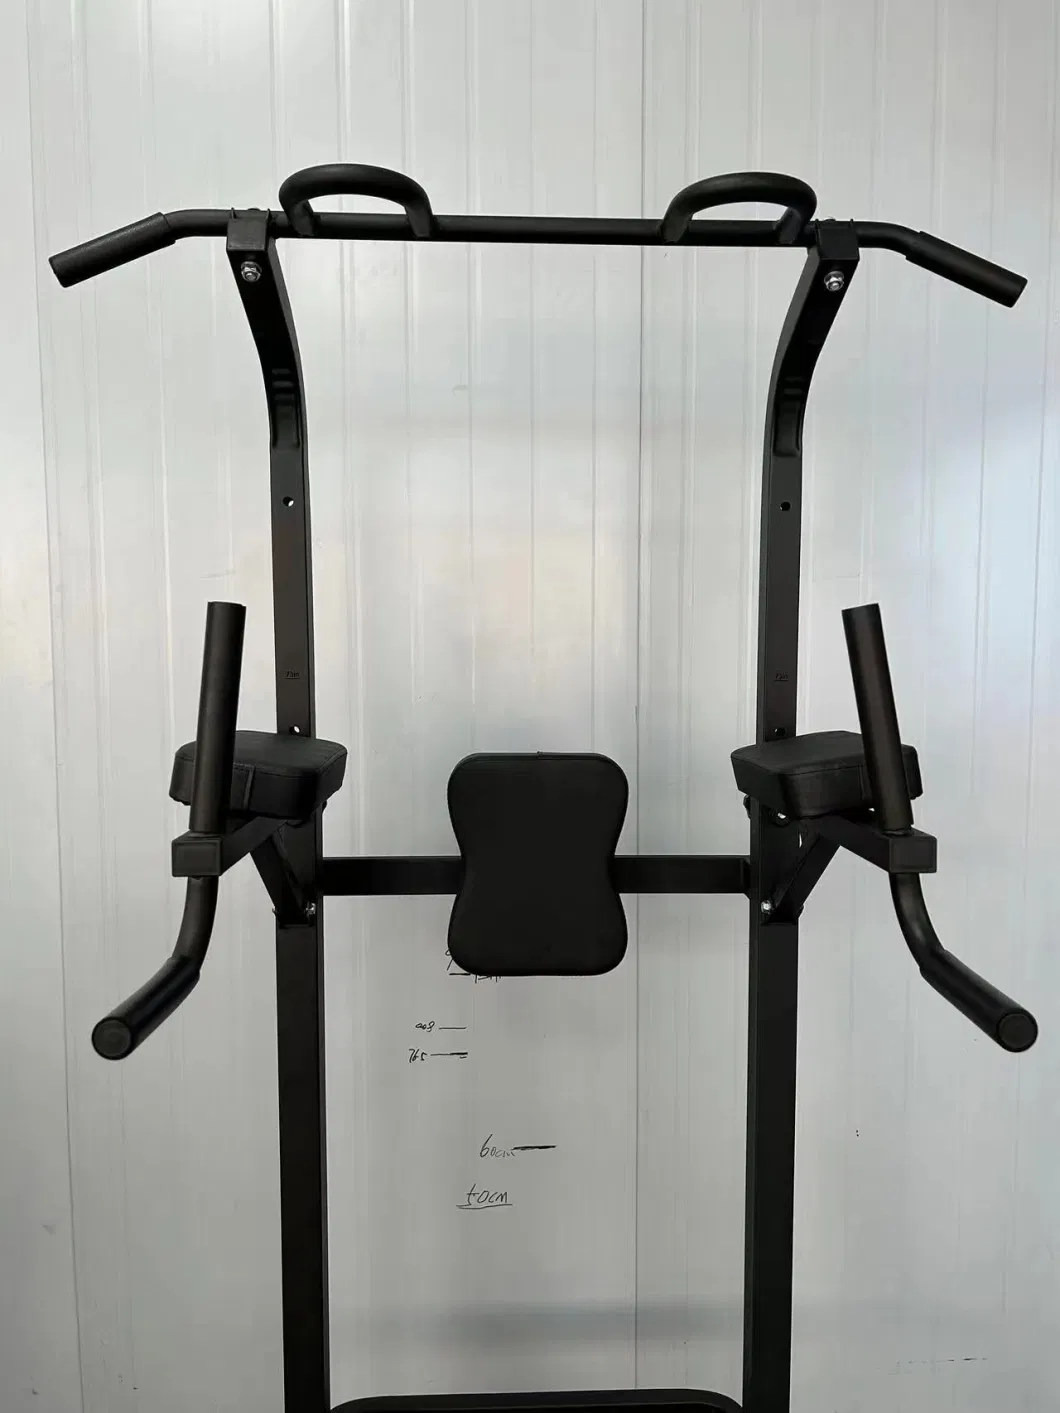 Multifunctional Wall Mounted Pull up Bar Chin up Bar DIP Station for Indoor Home Gym Workout